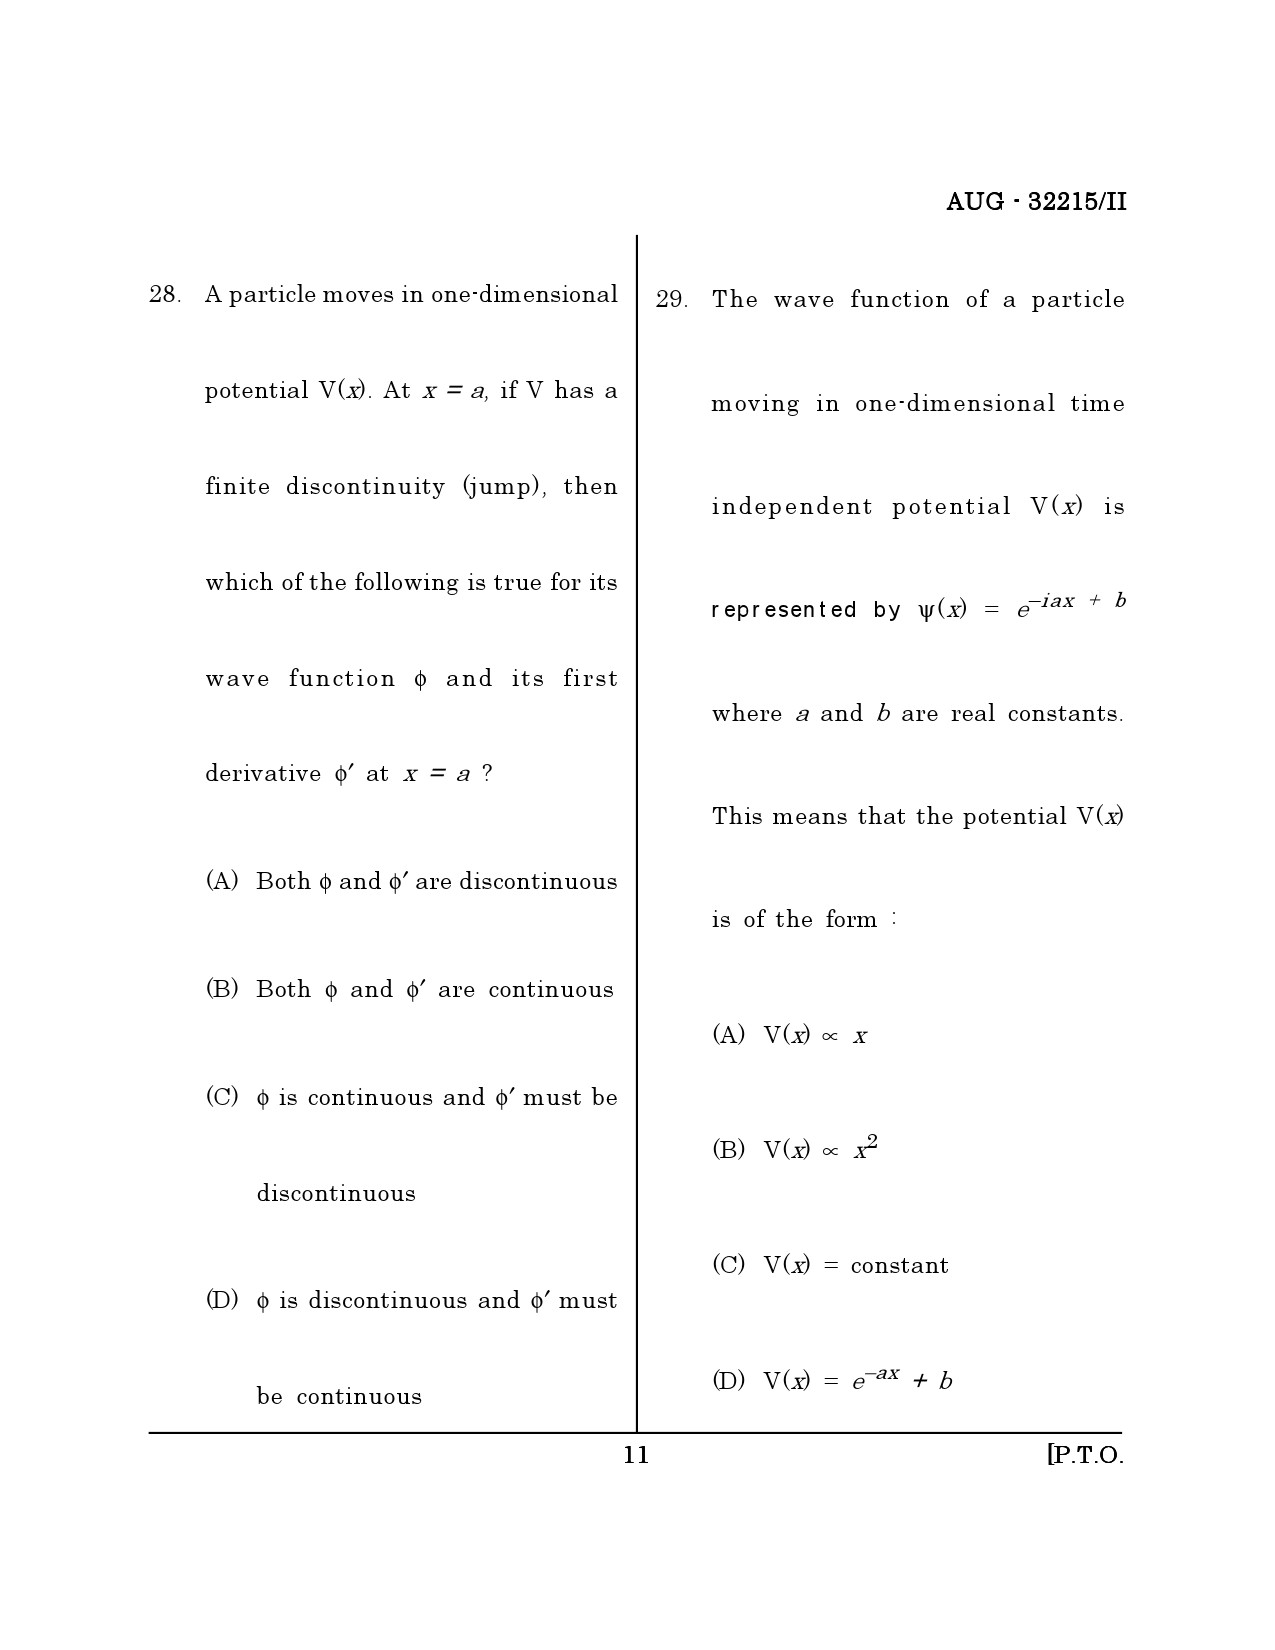 Maharashtra SET Physical Science Question Paper II August 2015 10